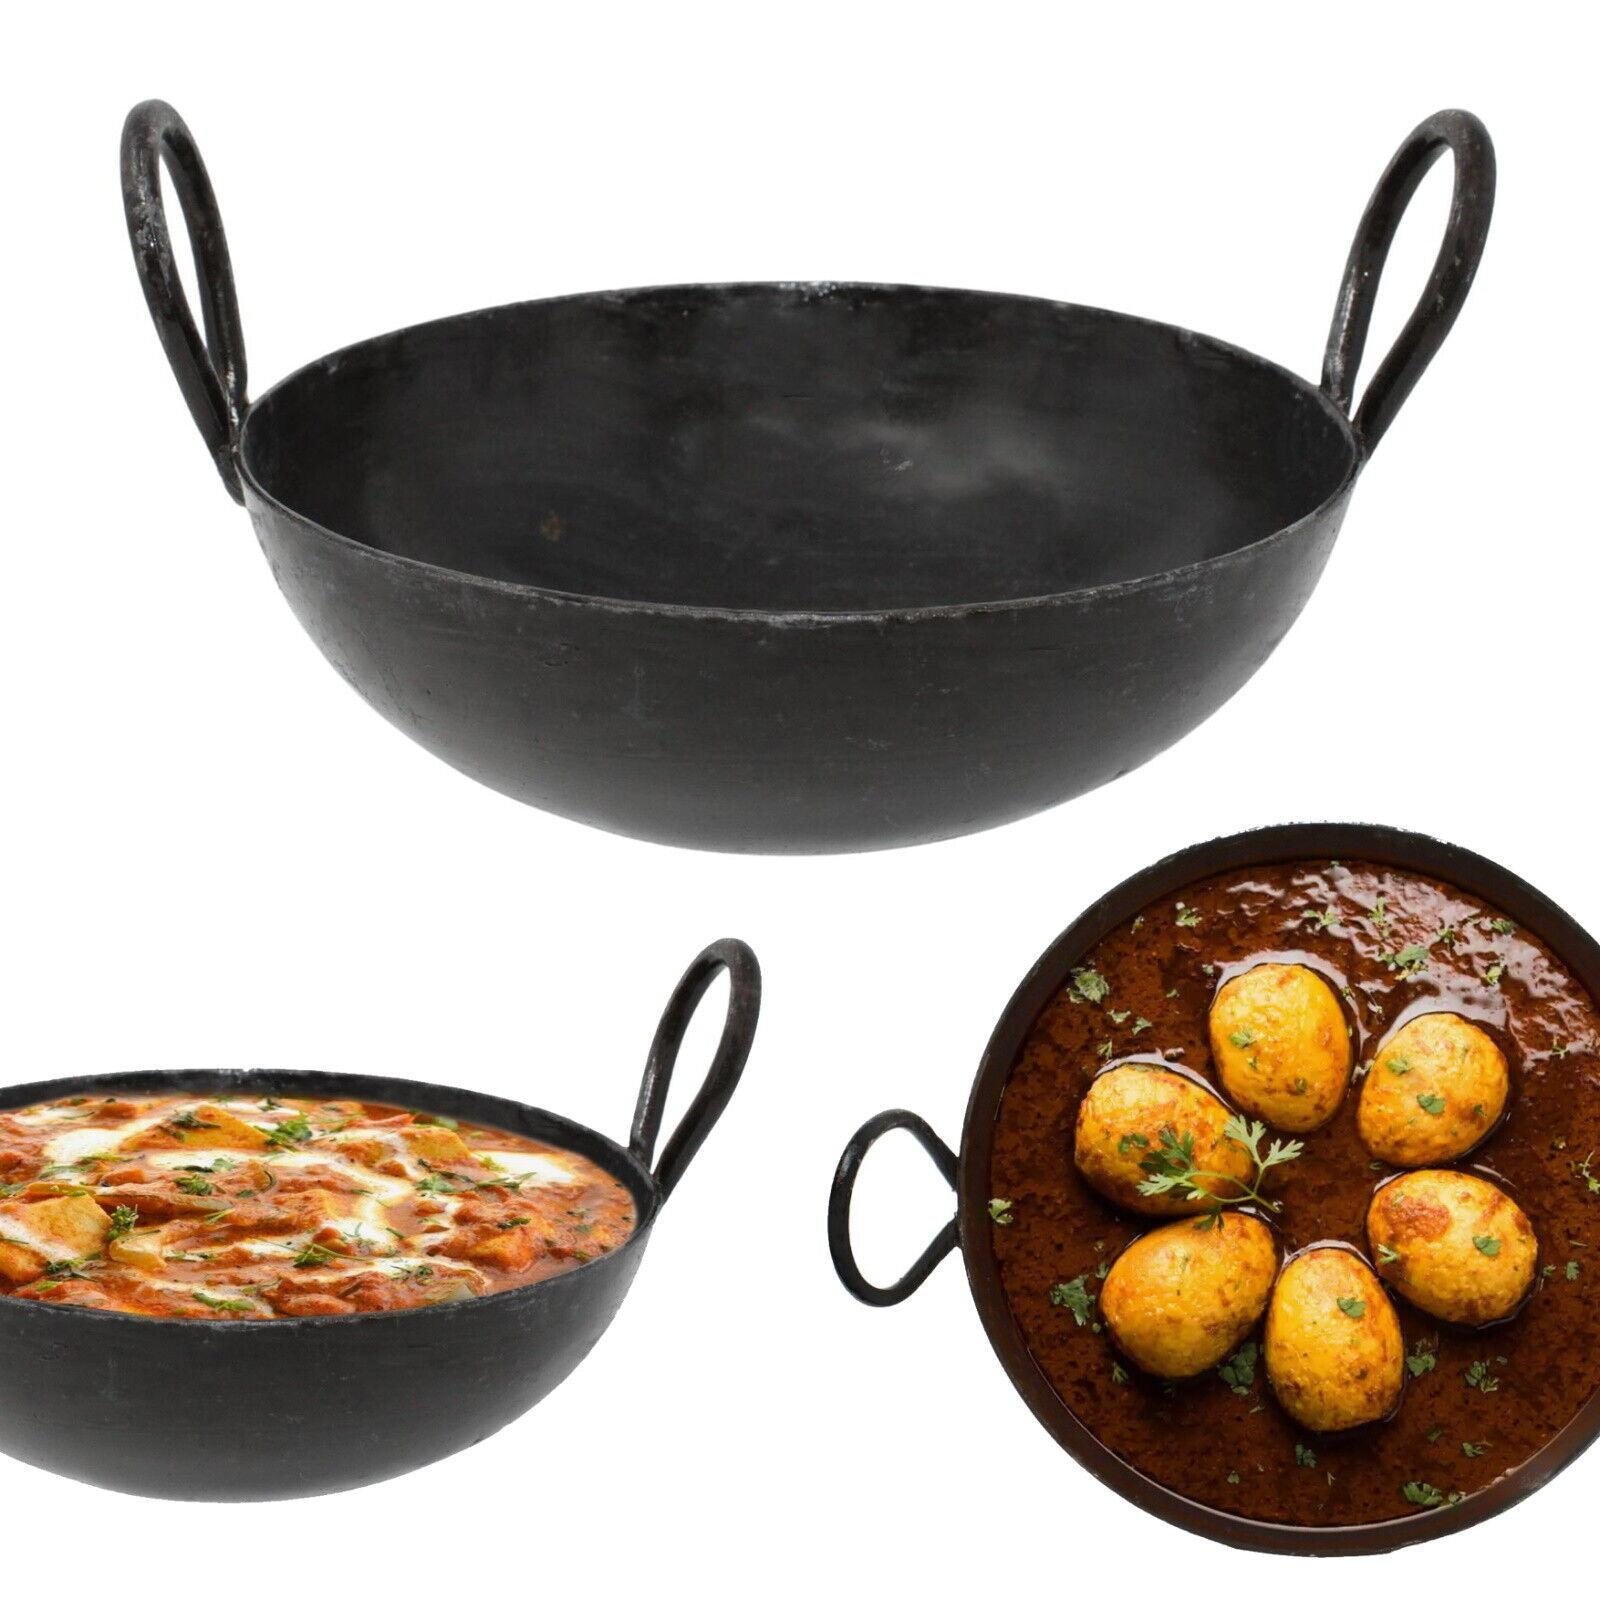  Backcountry Iron 14 inch Cast Iron Wok with Flat Base and  Handles: Home & Kitchen